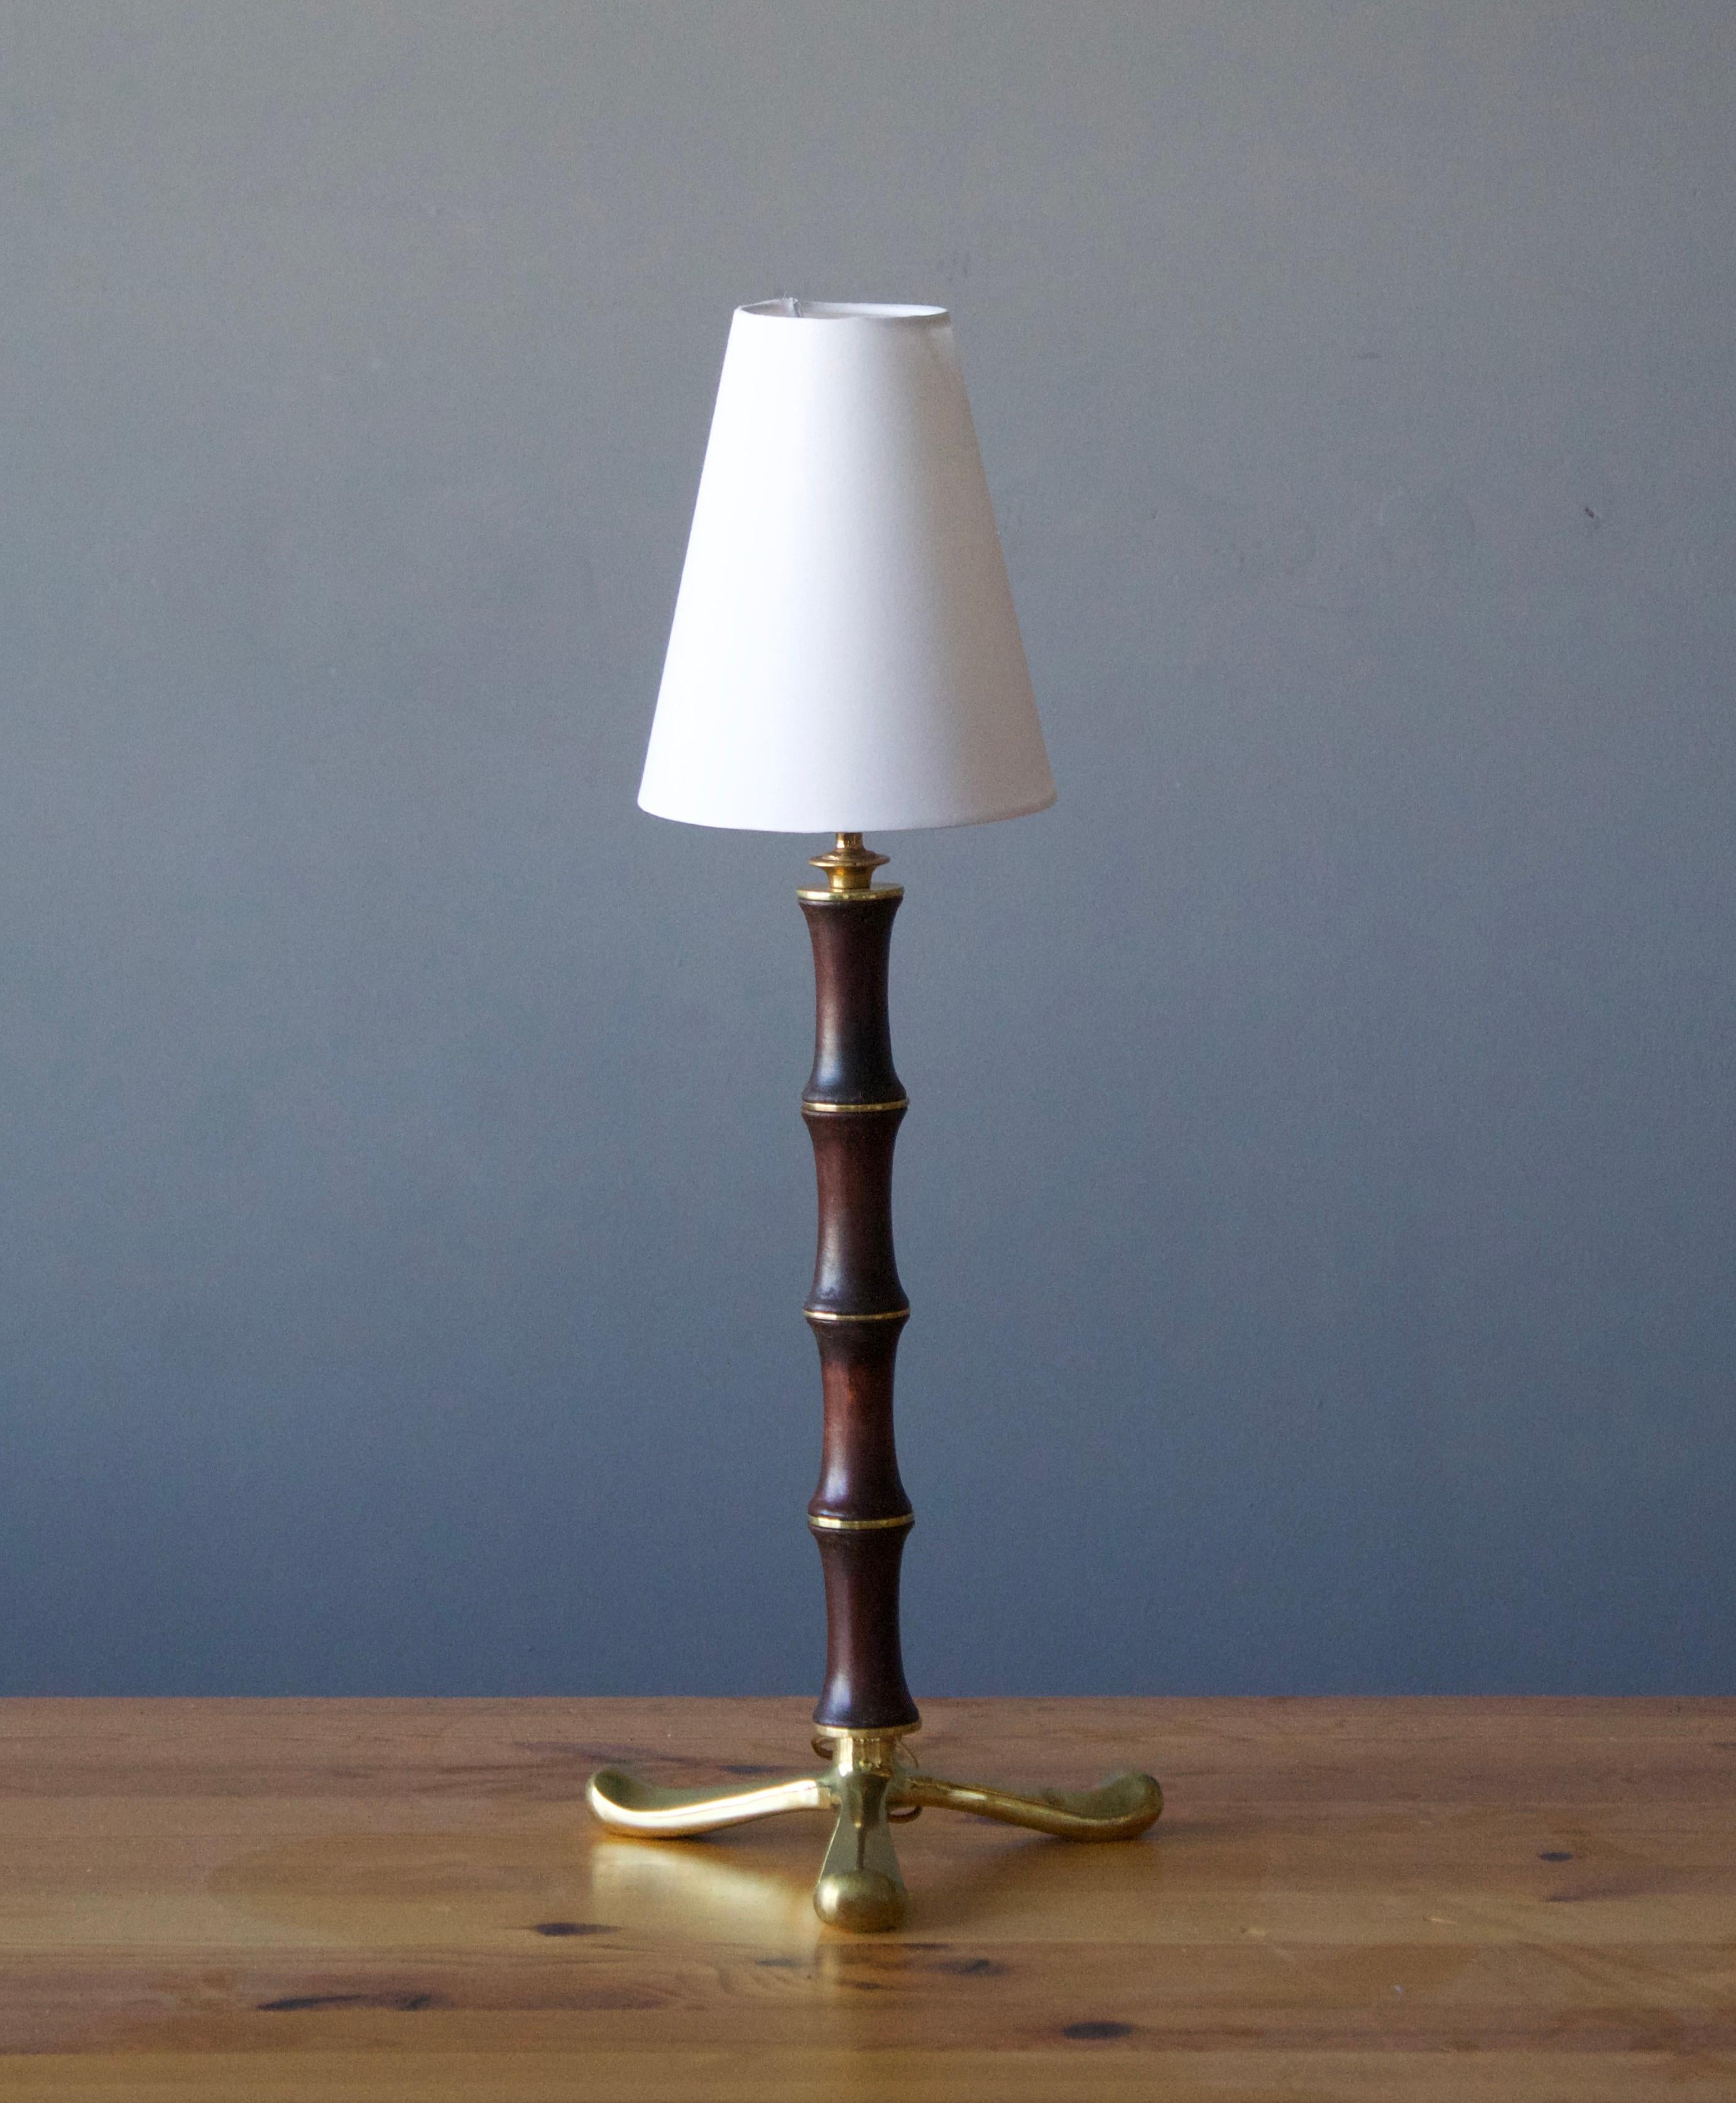 A table lamp on tripod base, designed and produced in Italy, 1940s.

Sold without lampshade. Dimensions excluding lampshade, height includes socket.